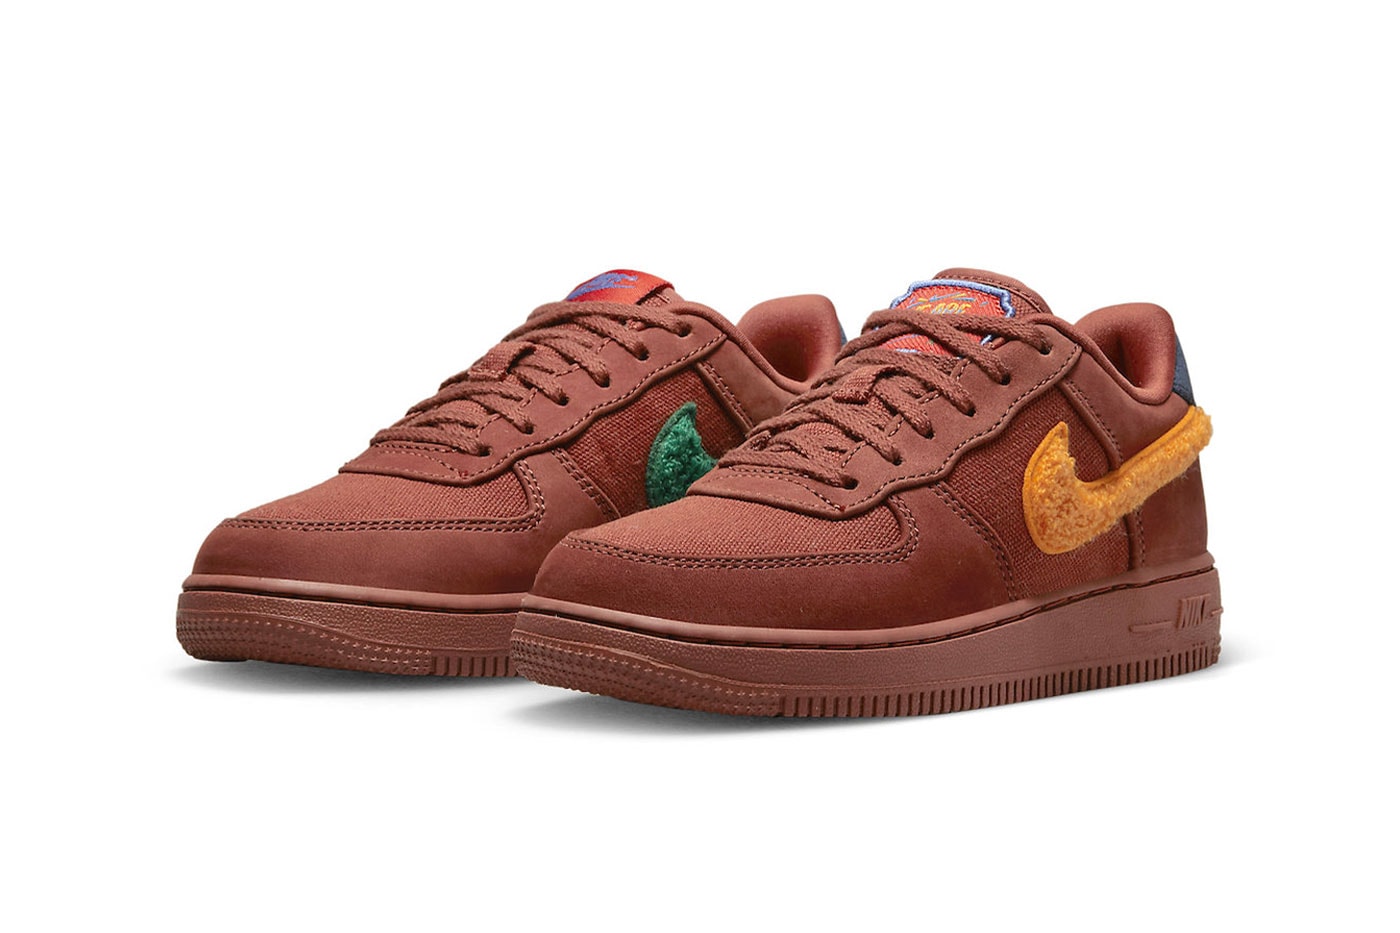 Nike Air Force 1 Low We Are Familia DX9285-600 First Look dia de muertos